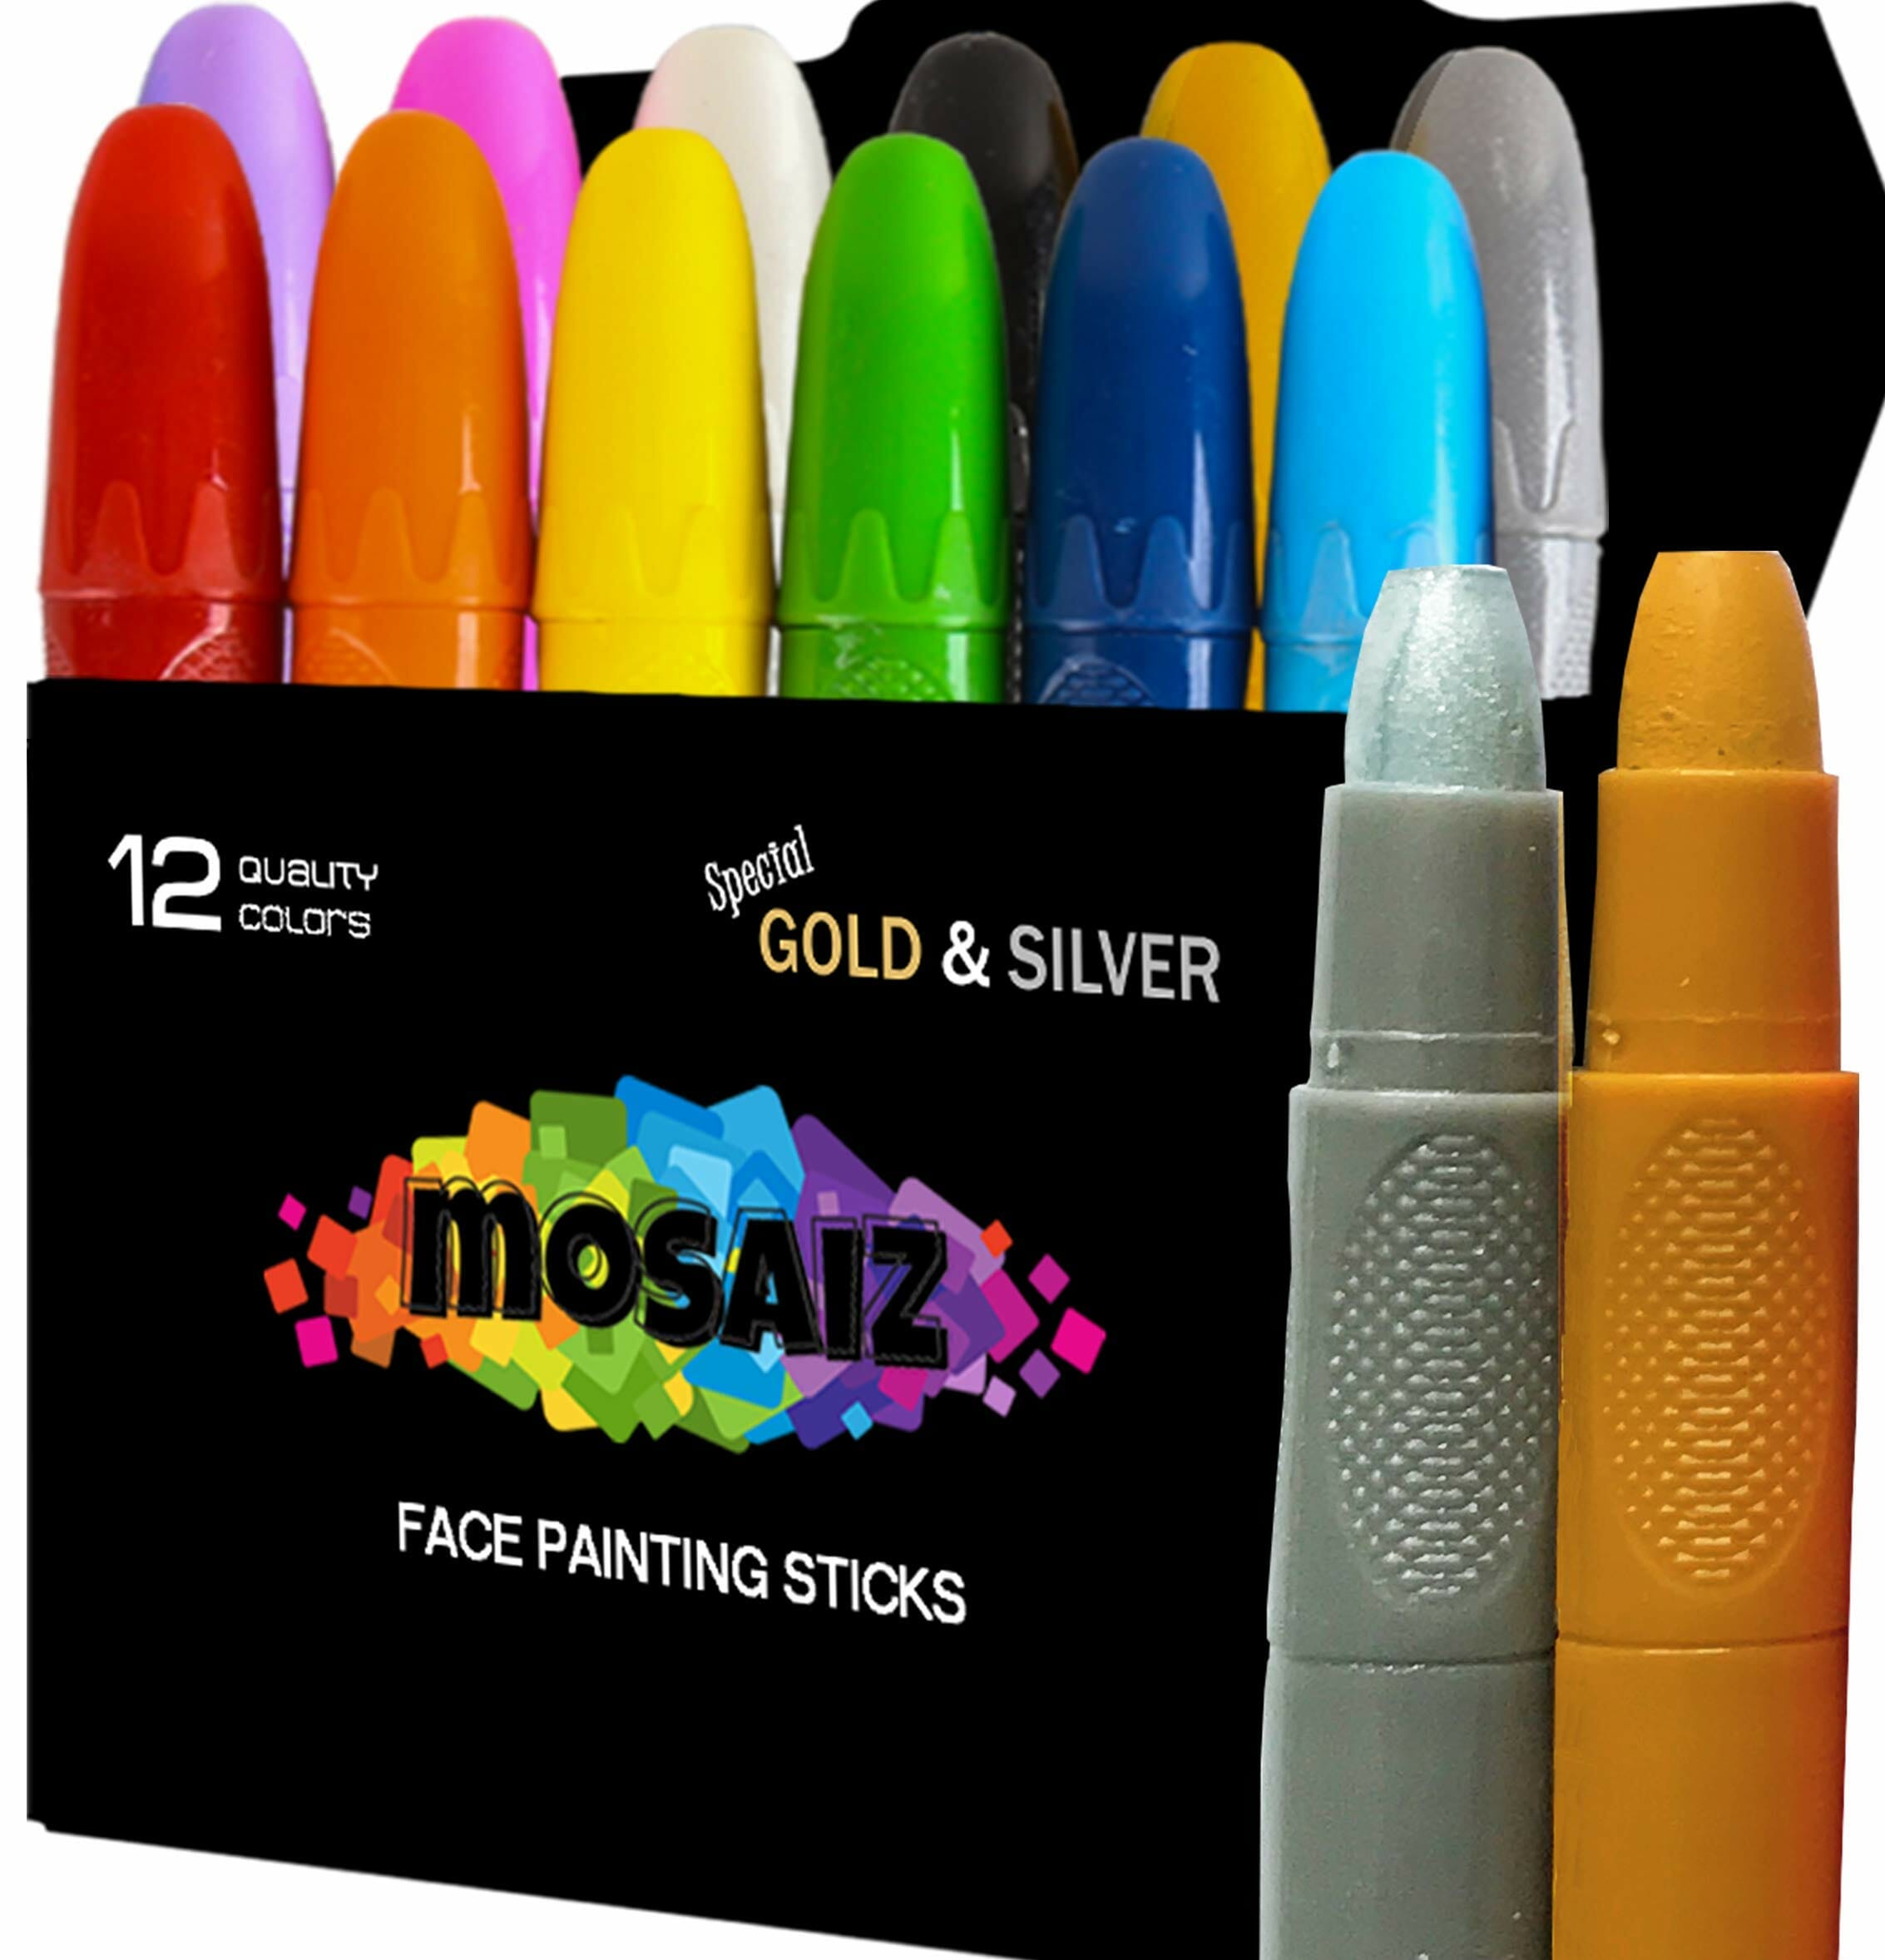 Mosaiz Face Painting Kits for Kids